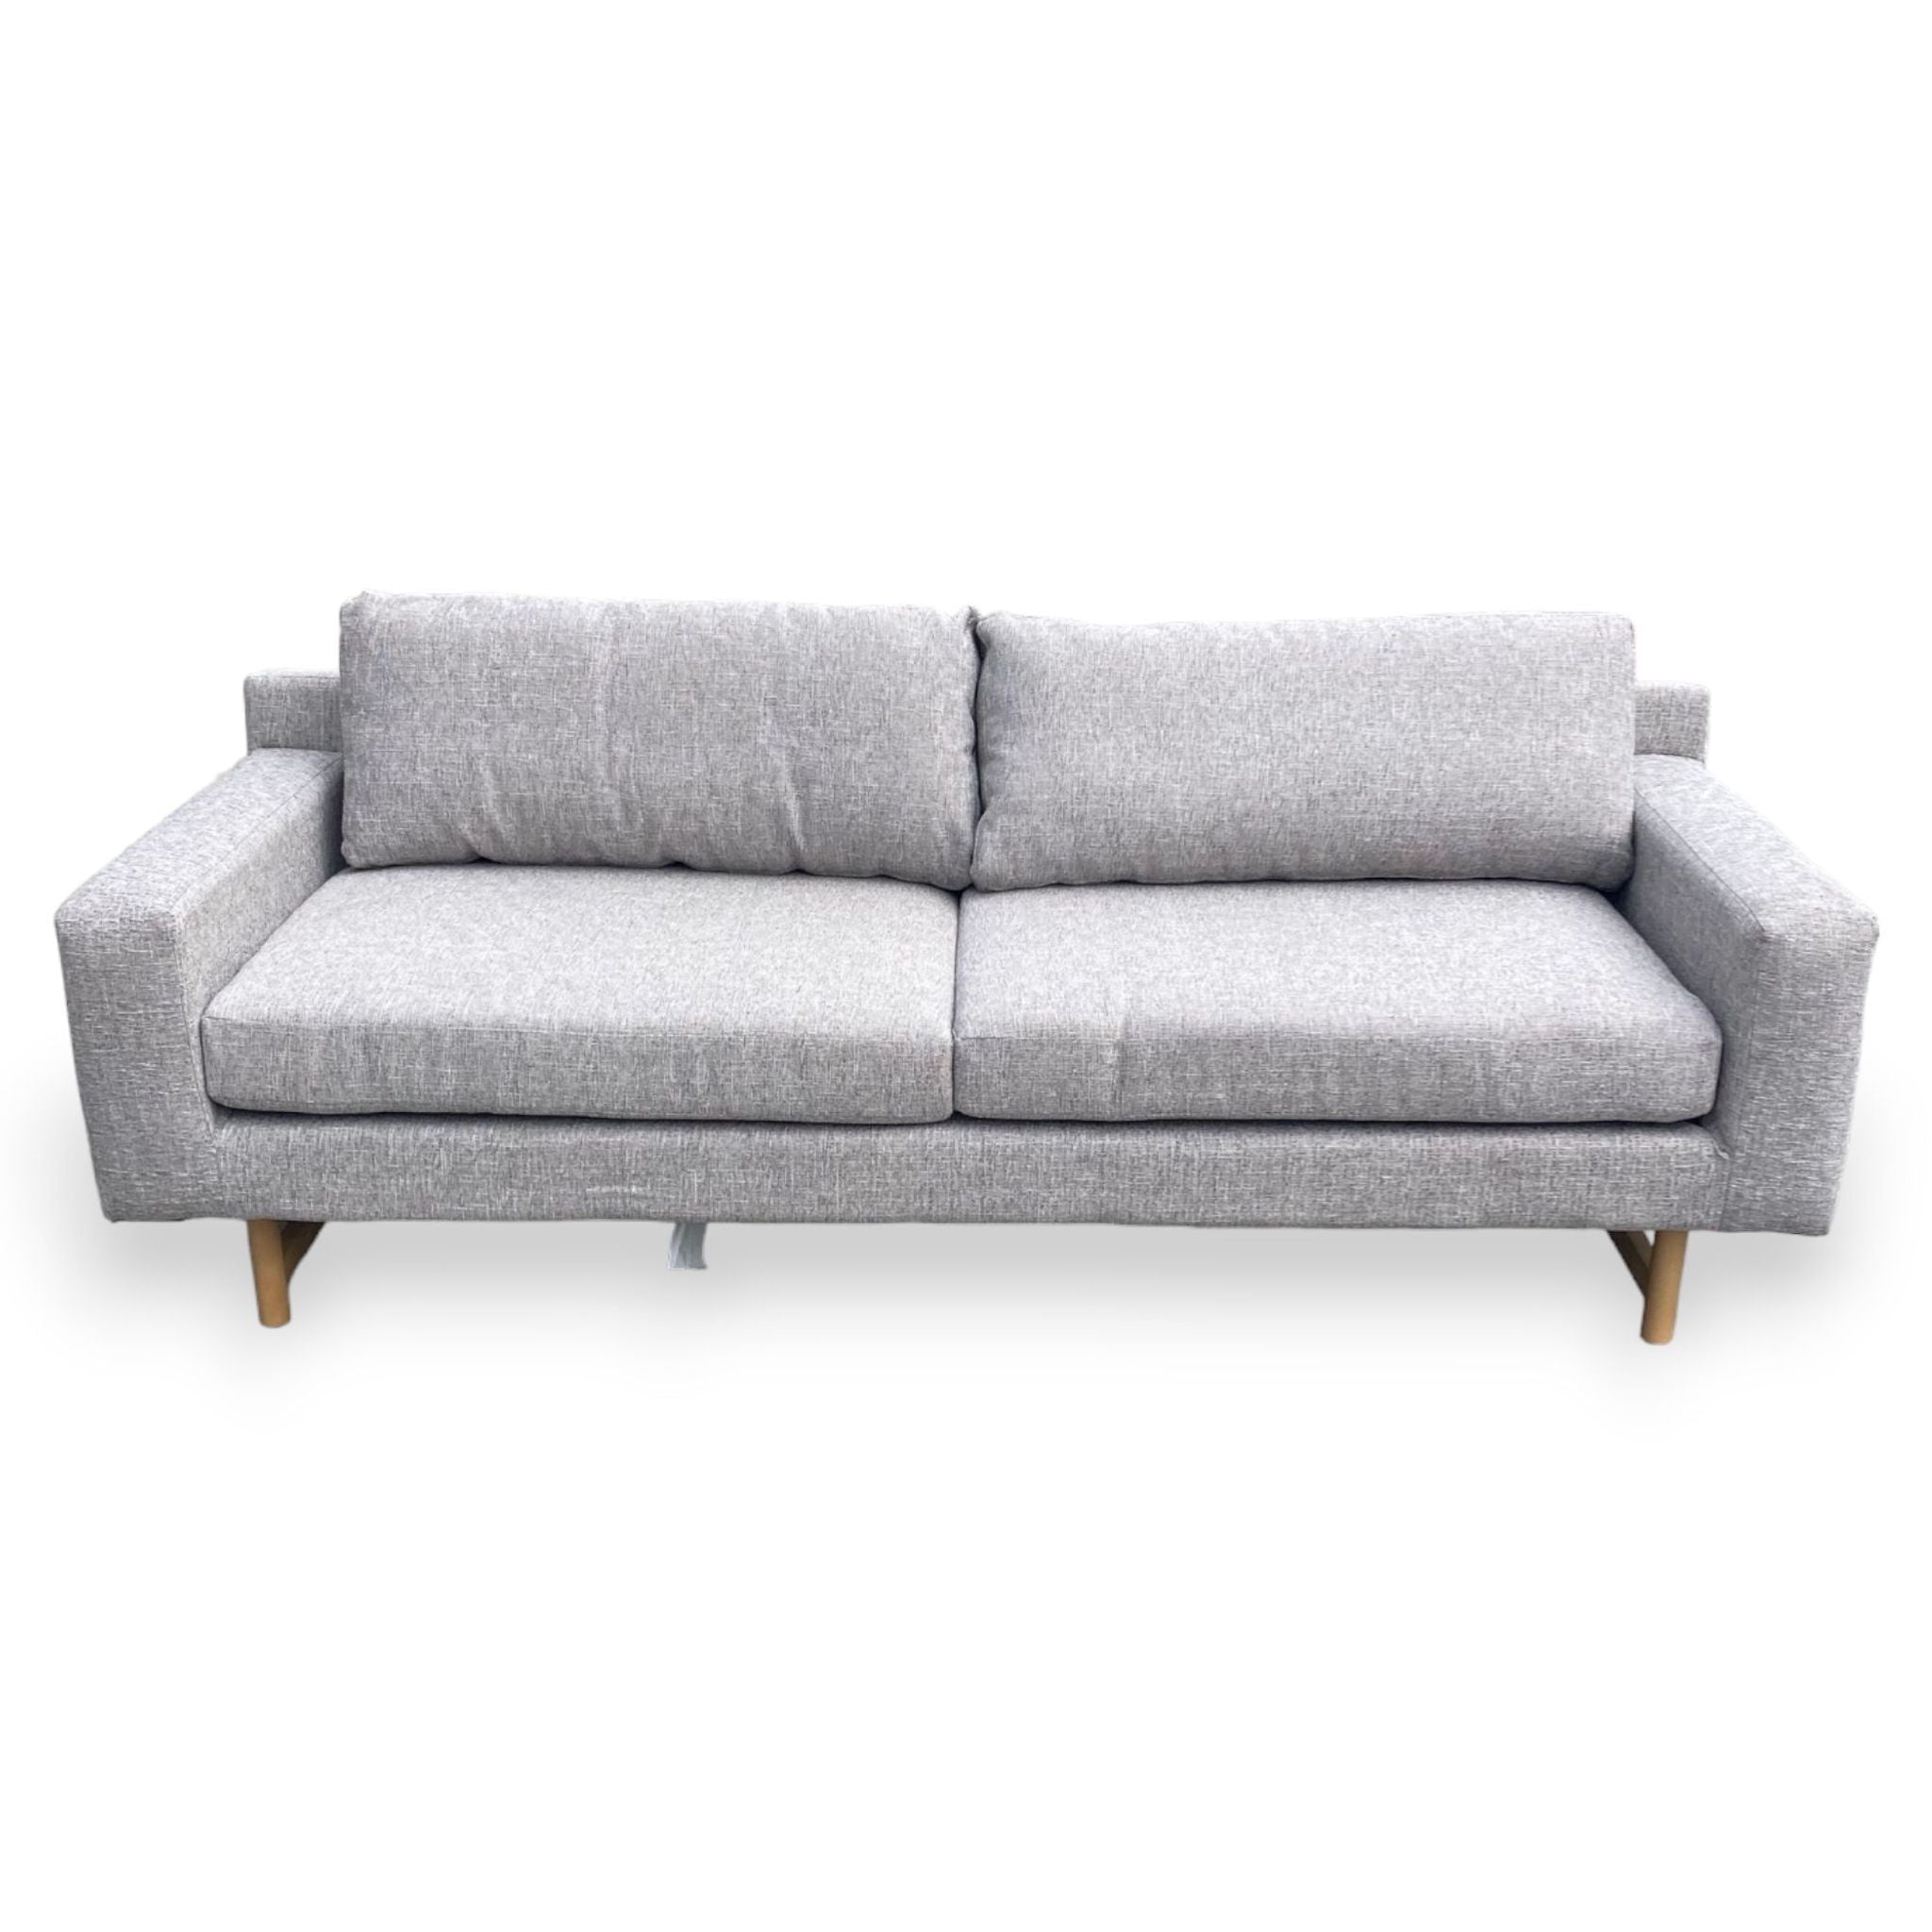 Alt text 1: A modern 3-seat West Elm sofa with a gray heather weave fabric, block arms, and light-finish wooden legs.